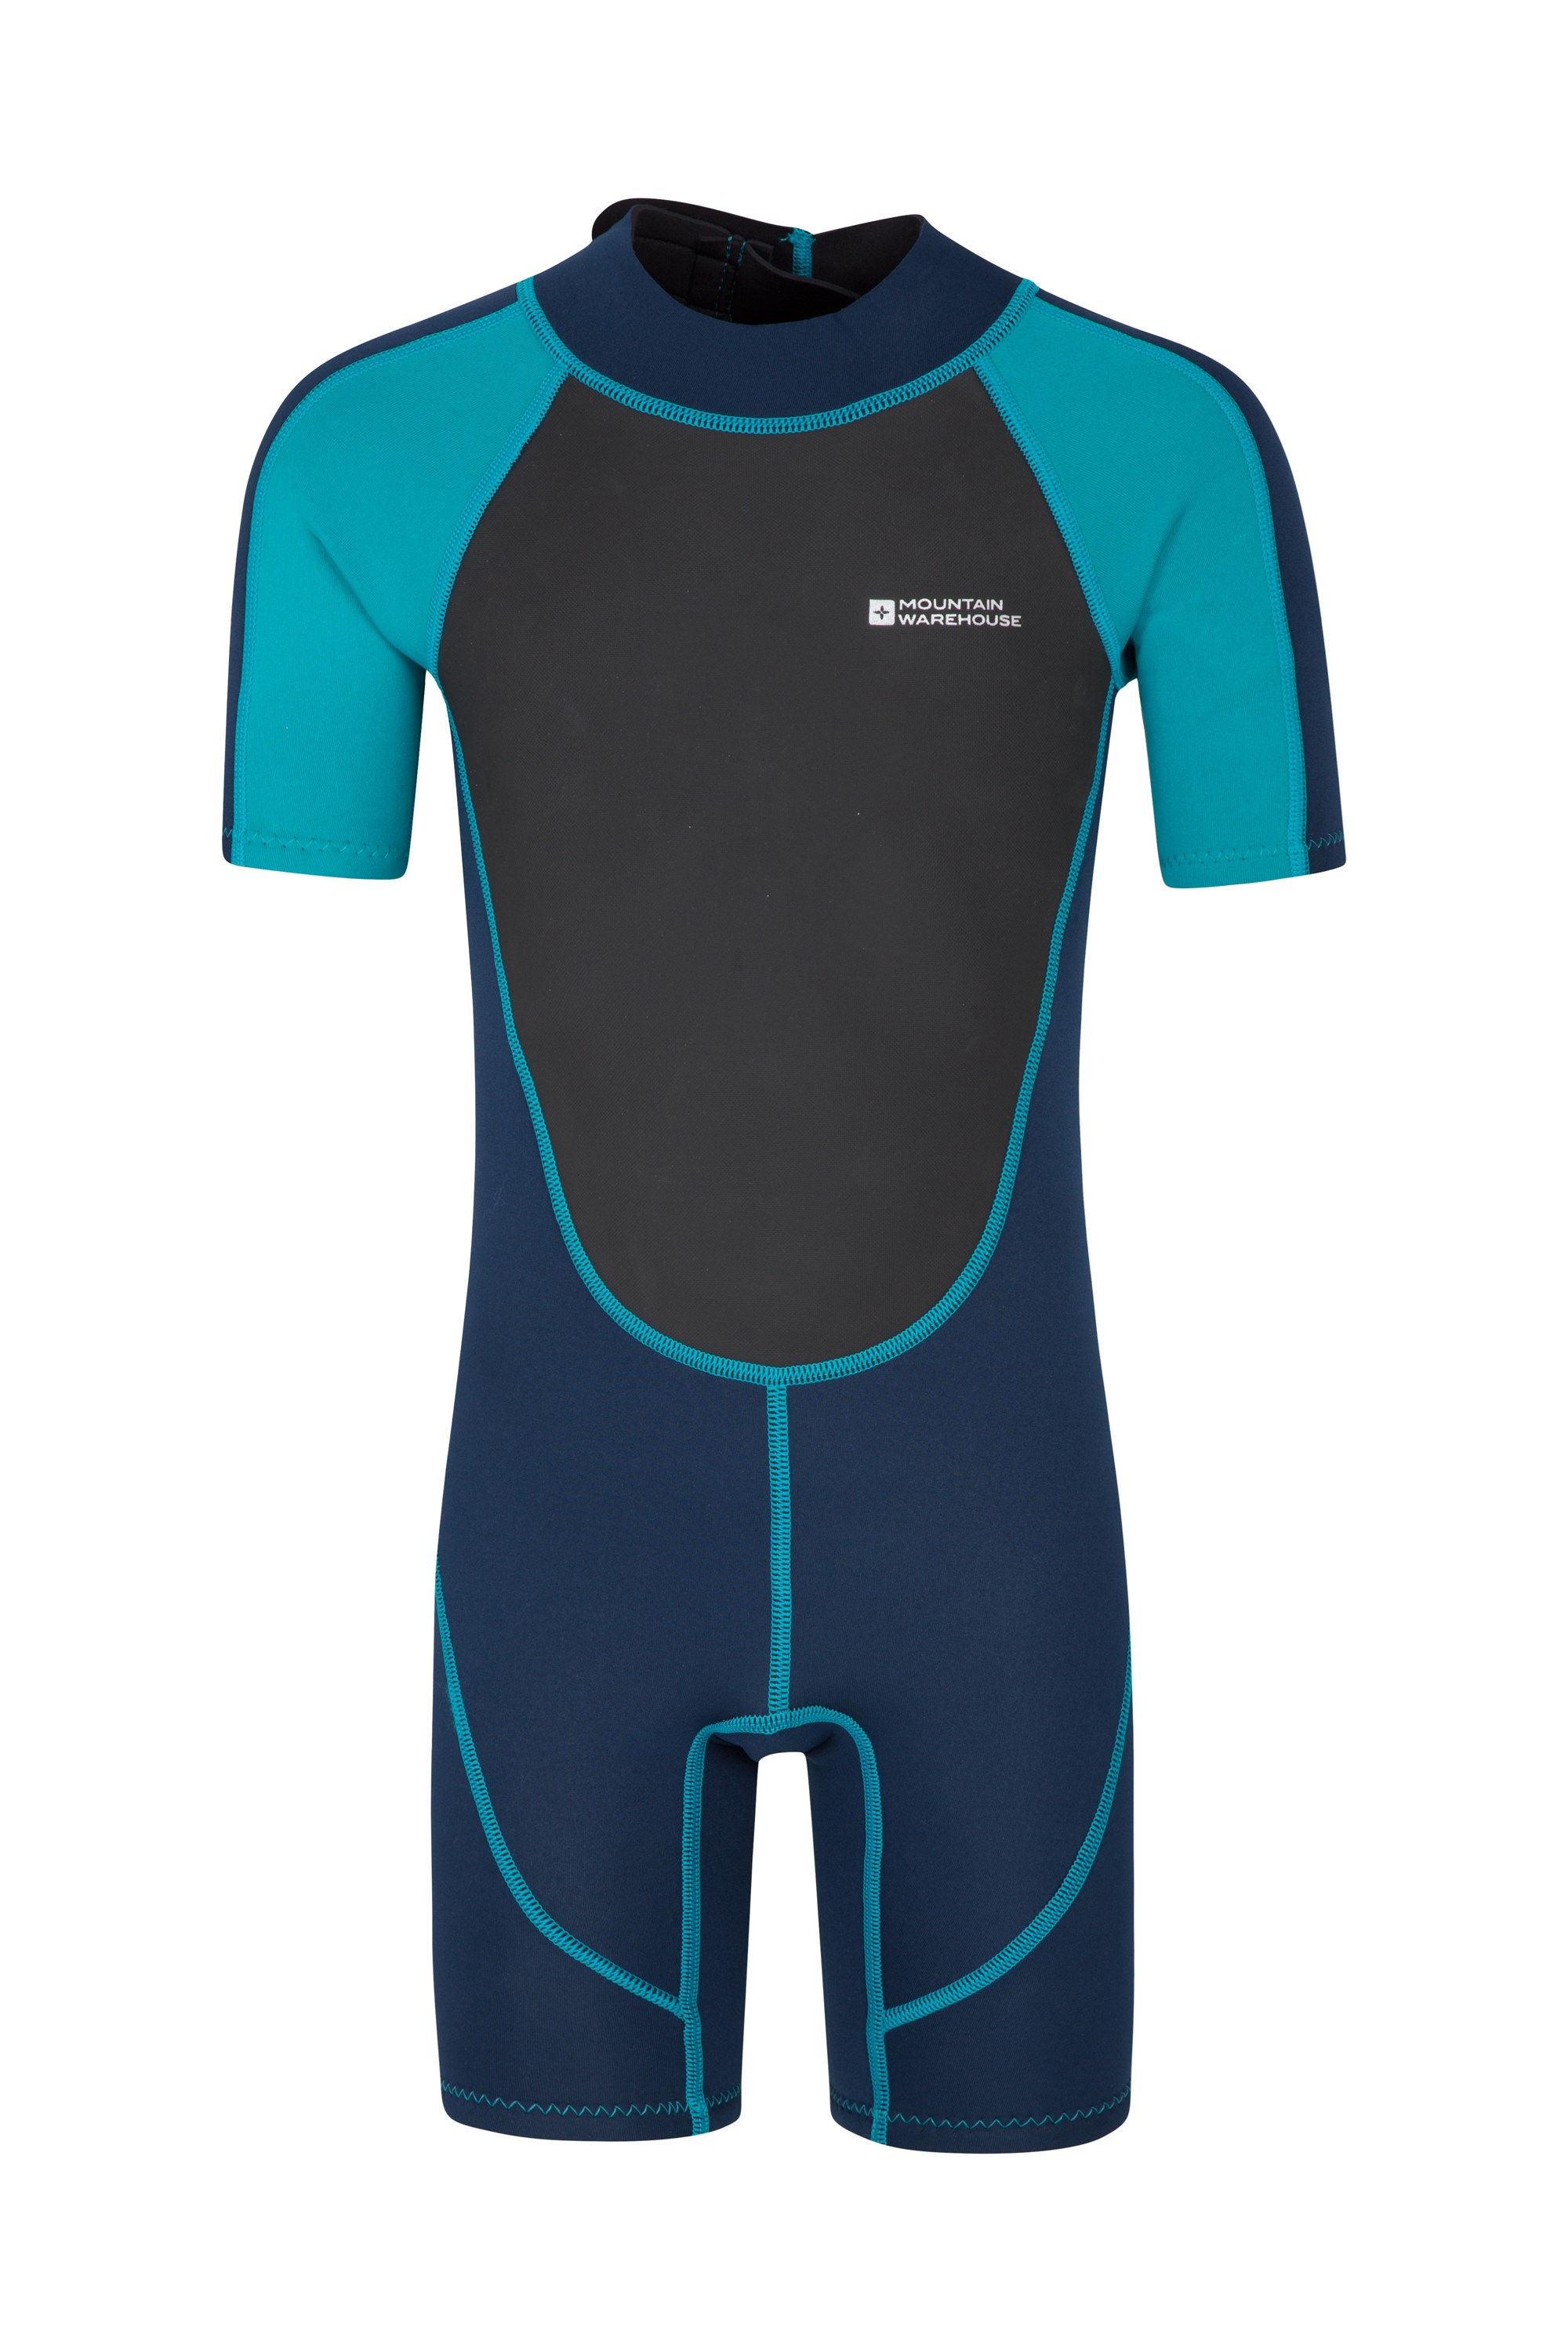 Kids Shorty Wetsuit - Teal